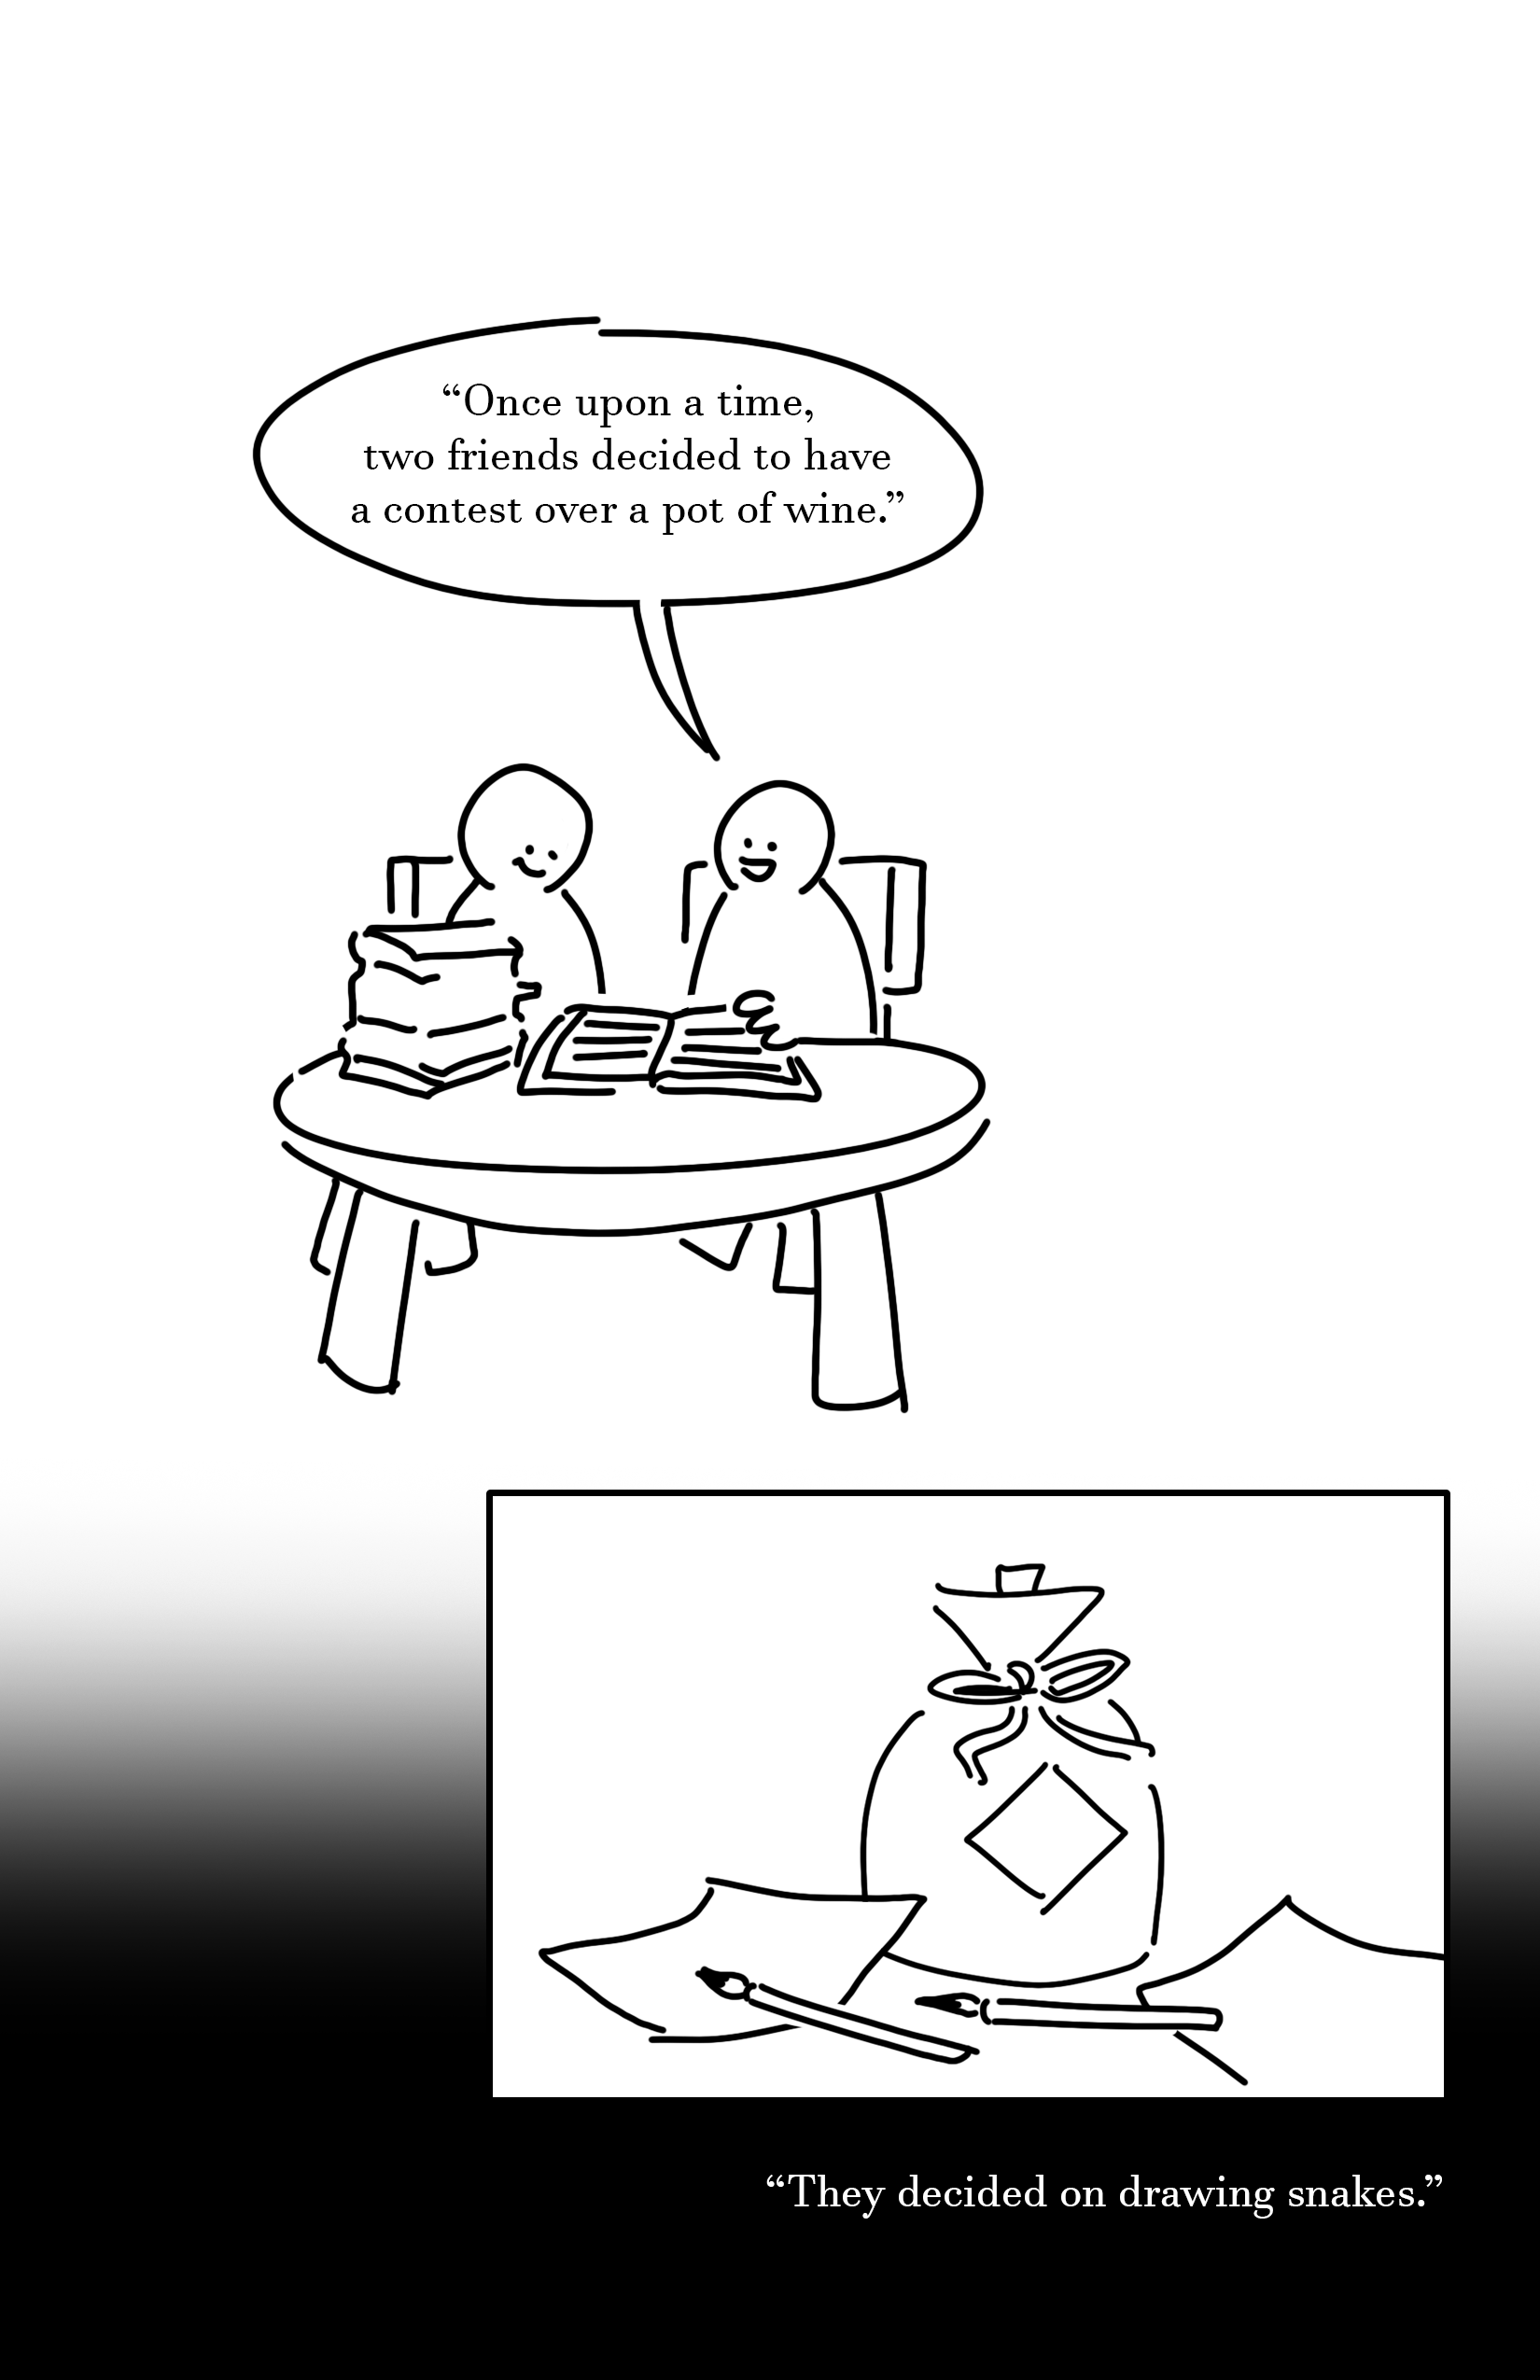 Black and white comic with simple digital drawings.
Panel 1: Two kids sit at a circular table with a stack of books on the left and an open book between them. They smile, and the kid on the right reads, "Once upon a time, two friends decided to have a contest over a pot of wine."
Panel 2: A pot of wine with a ribbon around it's neck and a square turned on it's side like a diamond. Two piece of paper and brushes lay beside it.
Text: "They decided on drawing snakes."
Page fades to black.